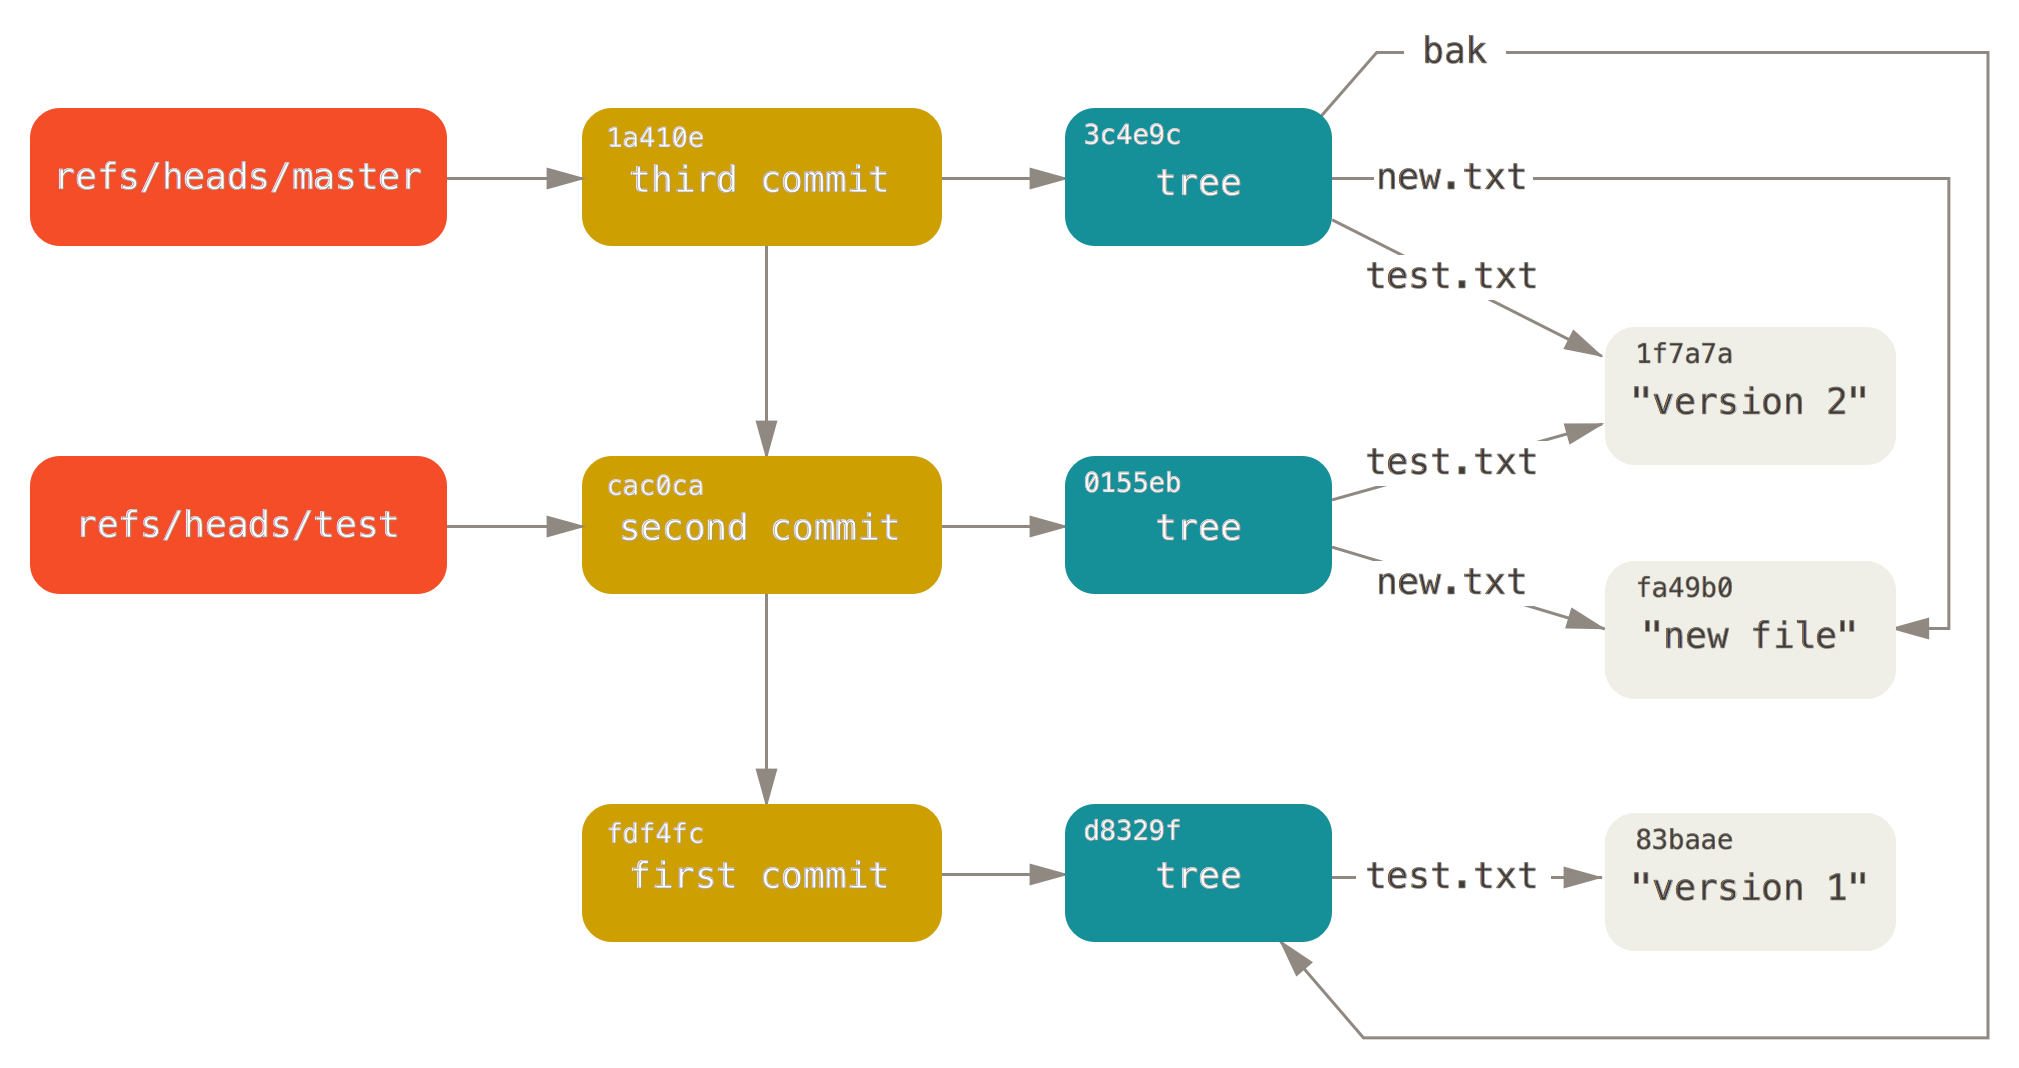 Git directory objects with branch head references included.